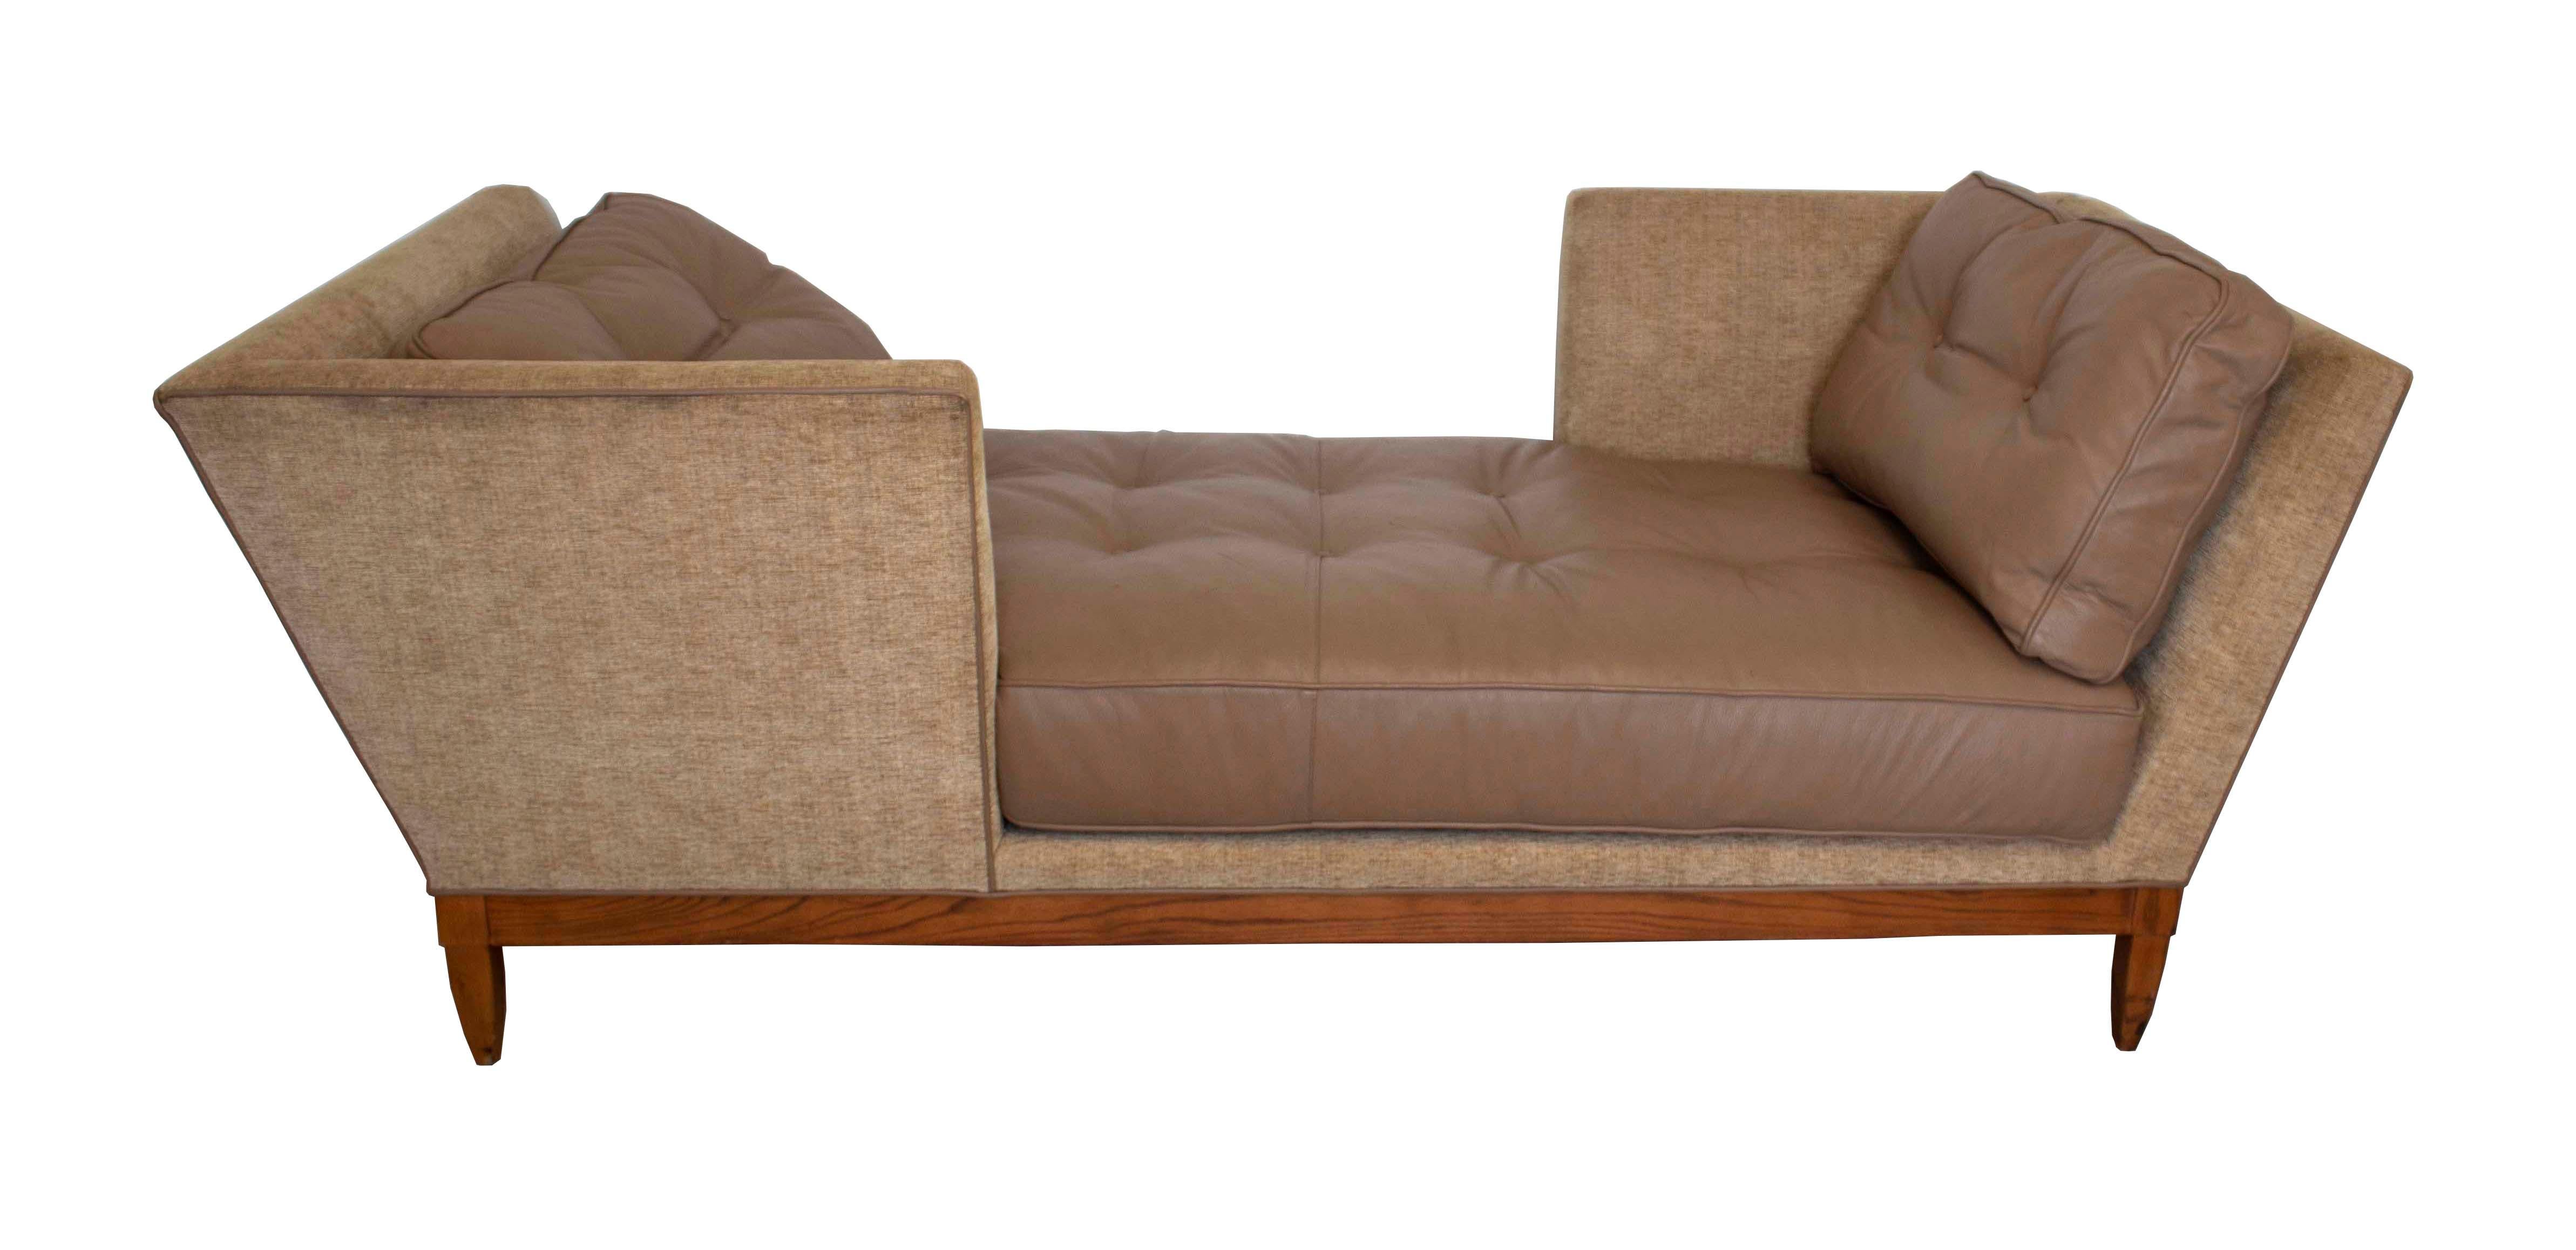 This comfortable settee, or tete a tete seats two generously, creating a nook for reading or conversation space. The plush upholstery supports leather monochromatic seat and back cushions, detailed in welt and tufted buttons. The wood frame and